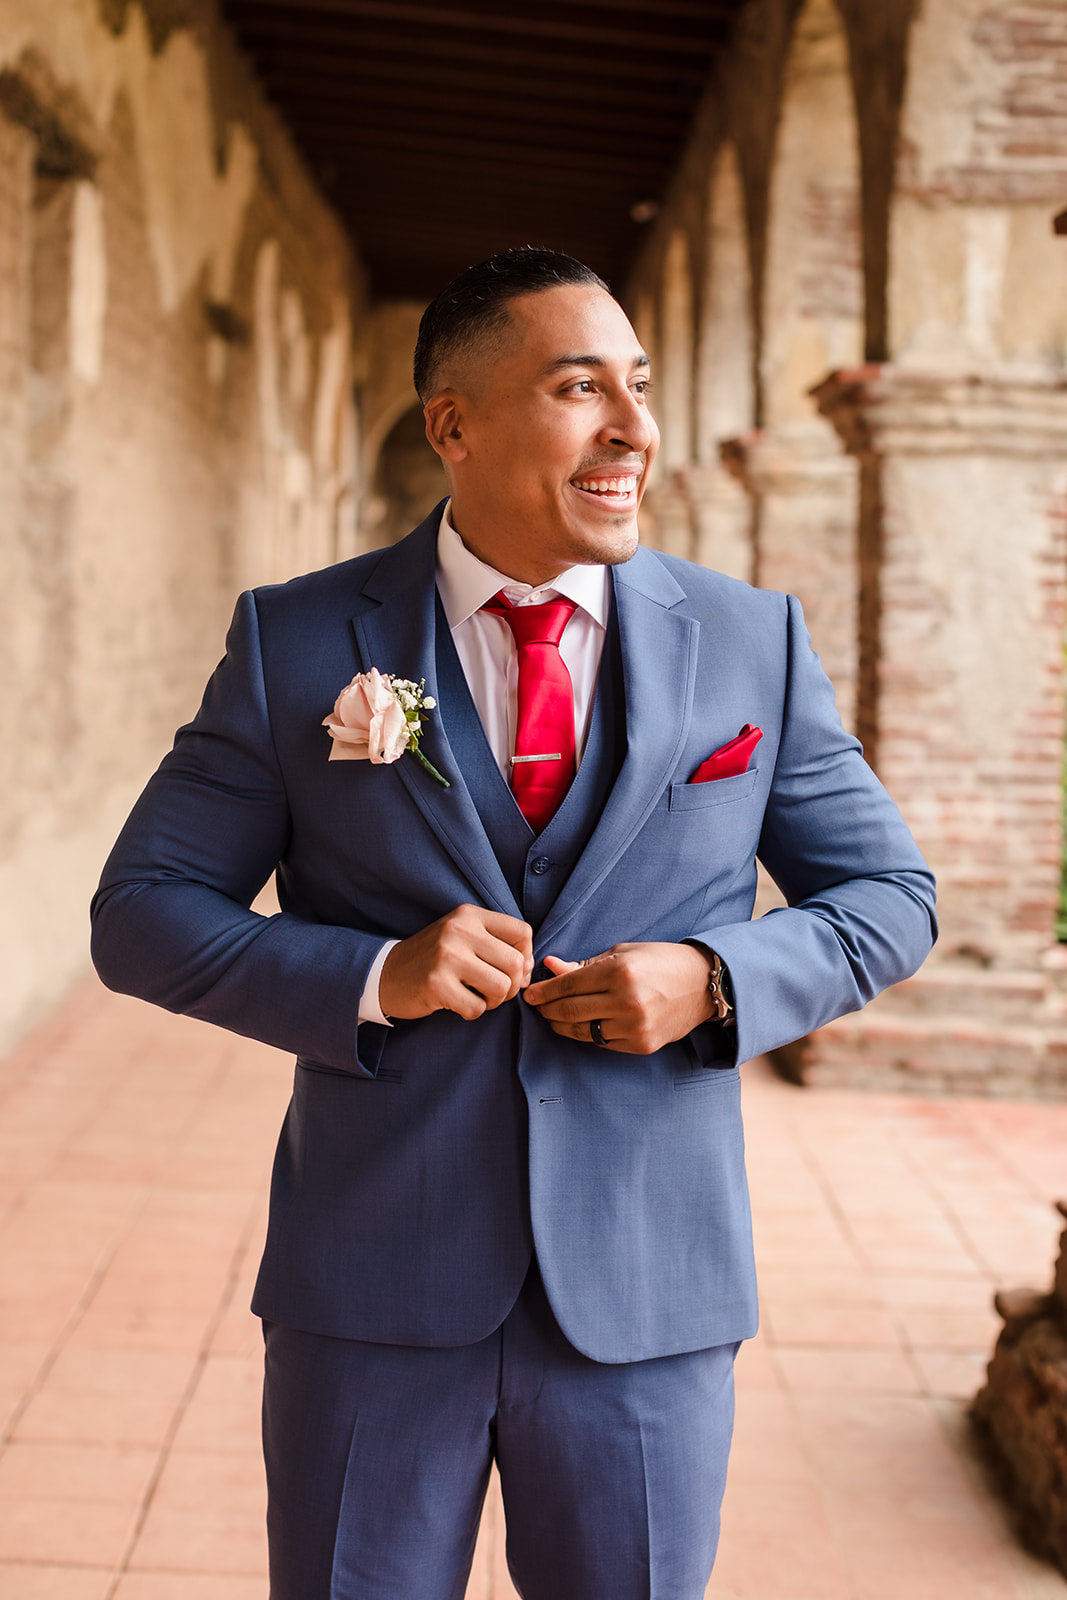 Groom's blue and red wedding attire